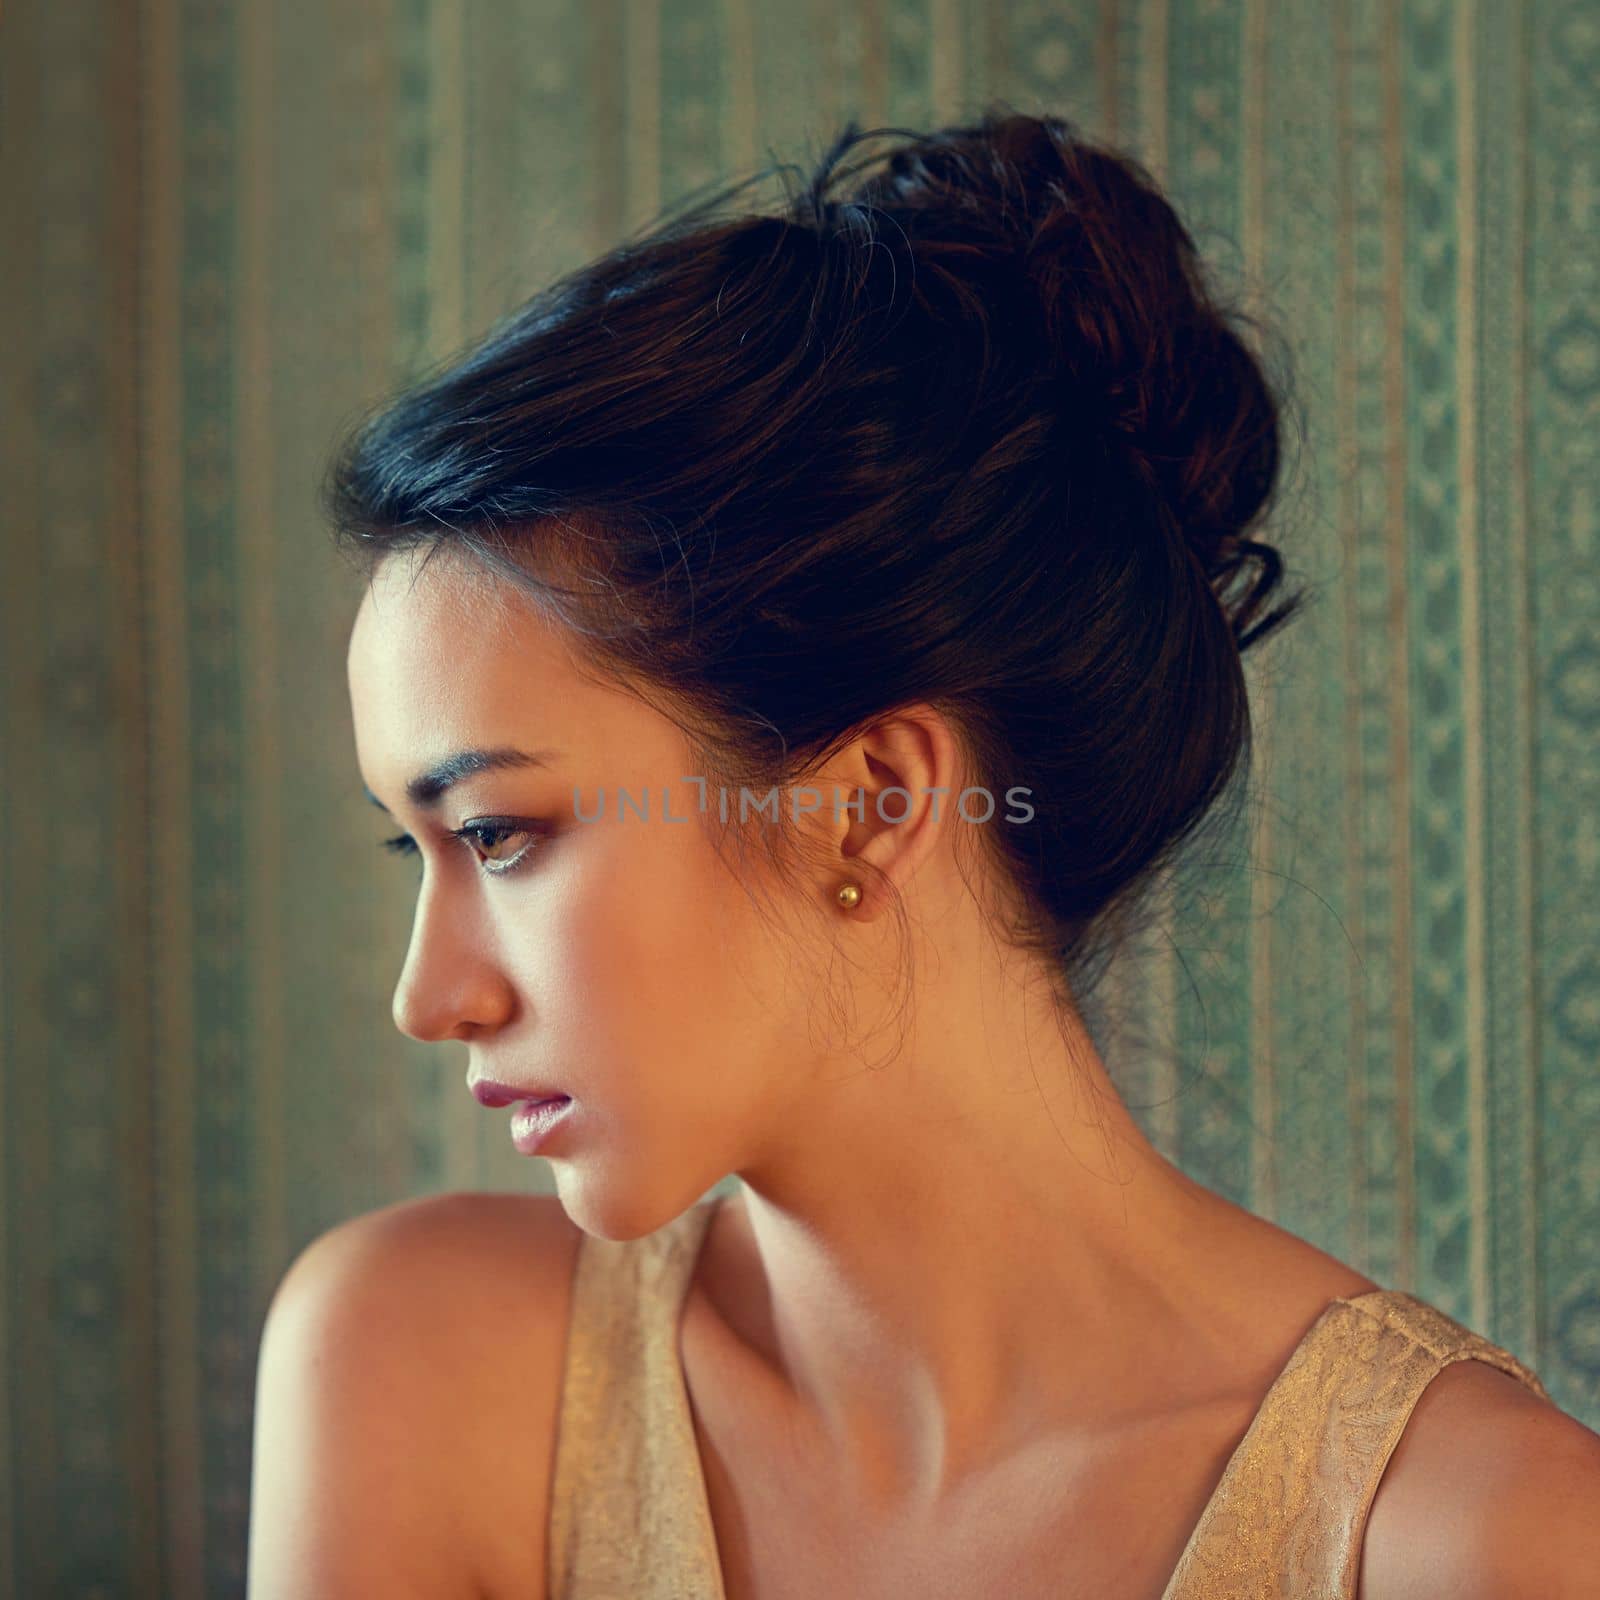 Sensual beauty of another era. Profile shot of a beautiful young woman dressed elegantly indoors